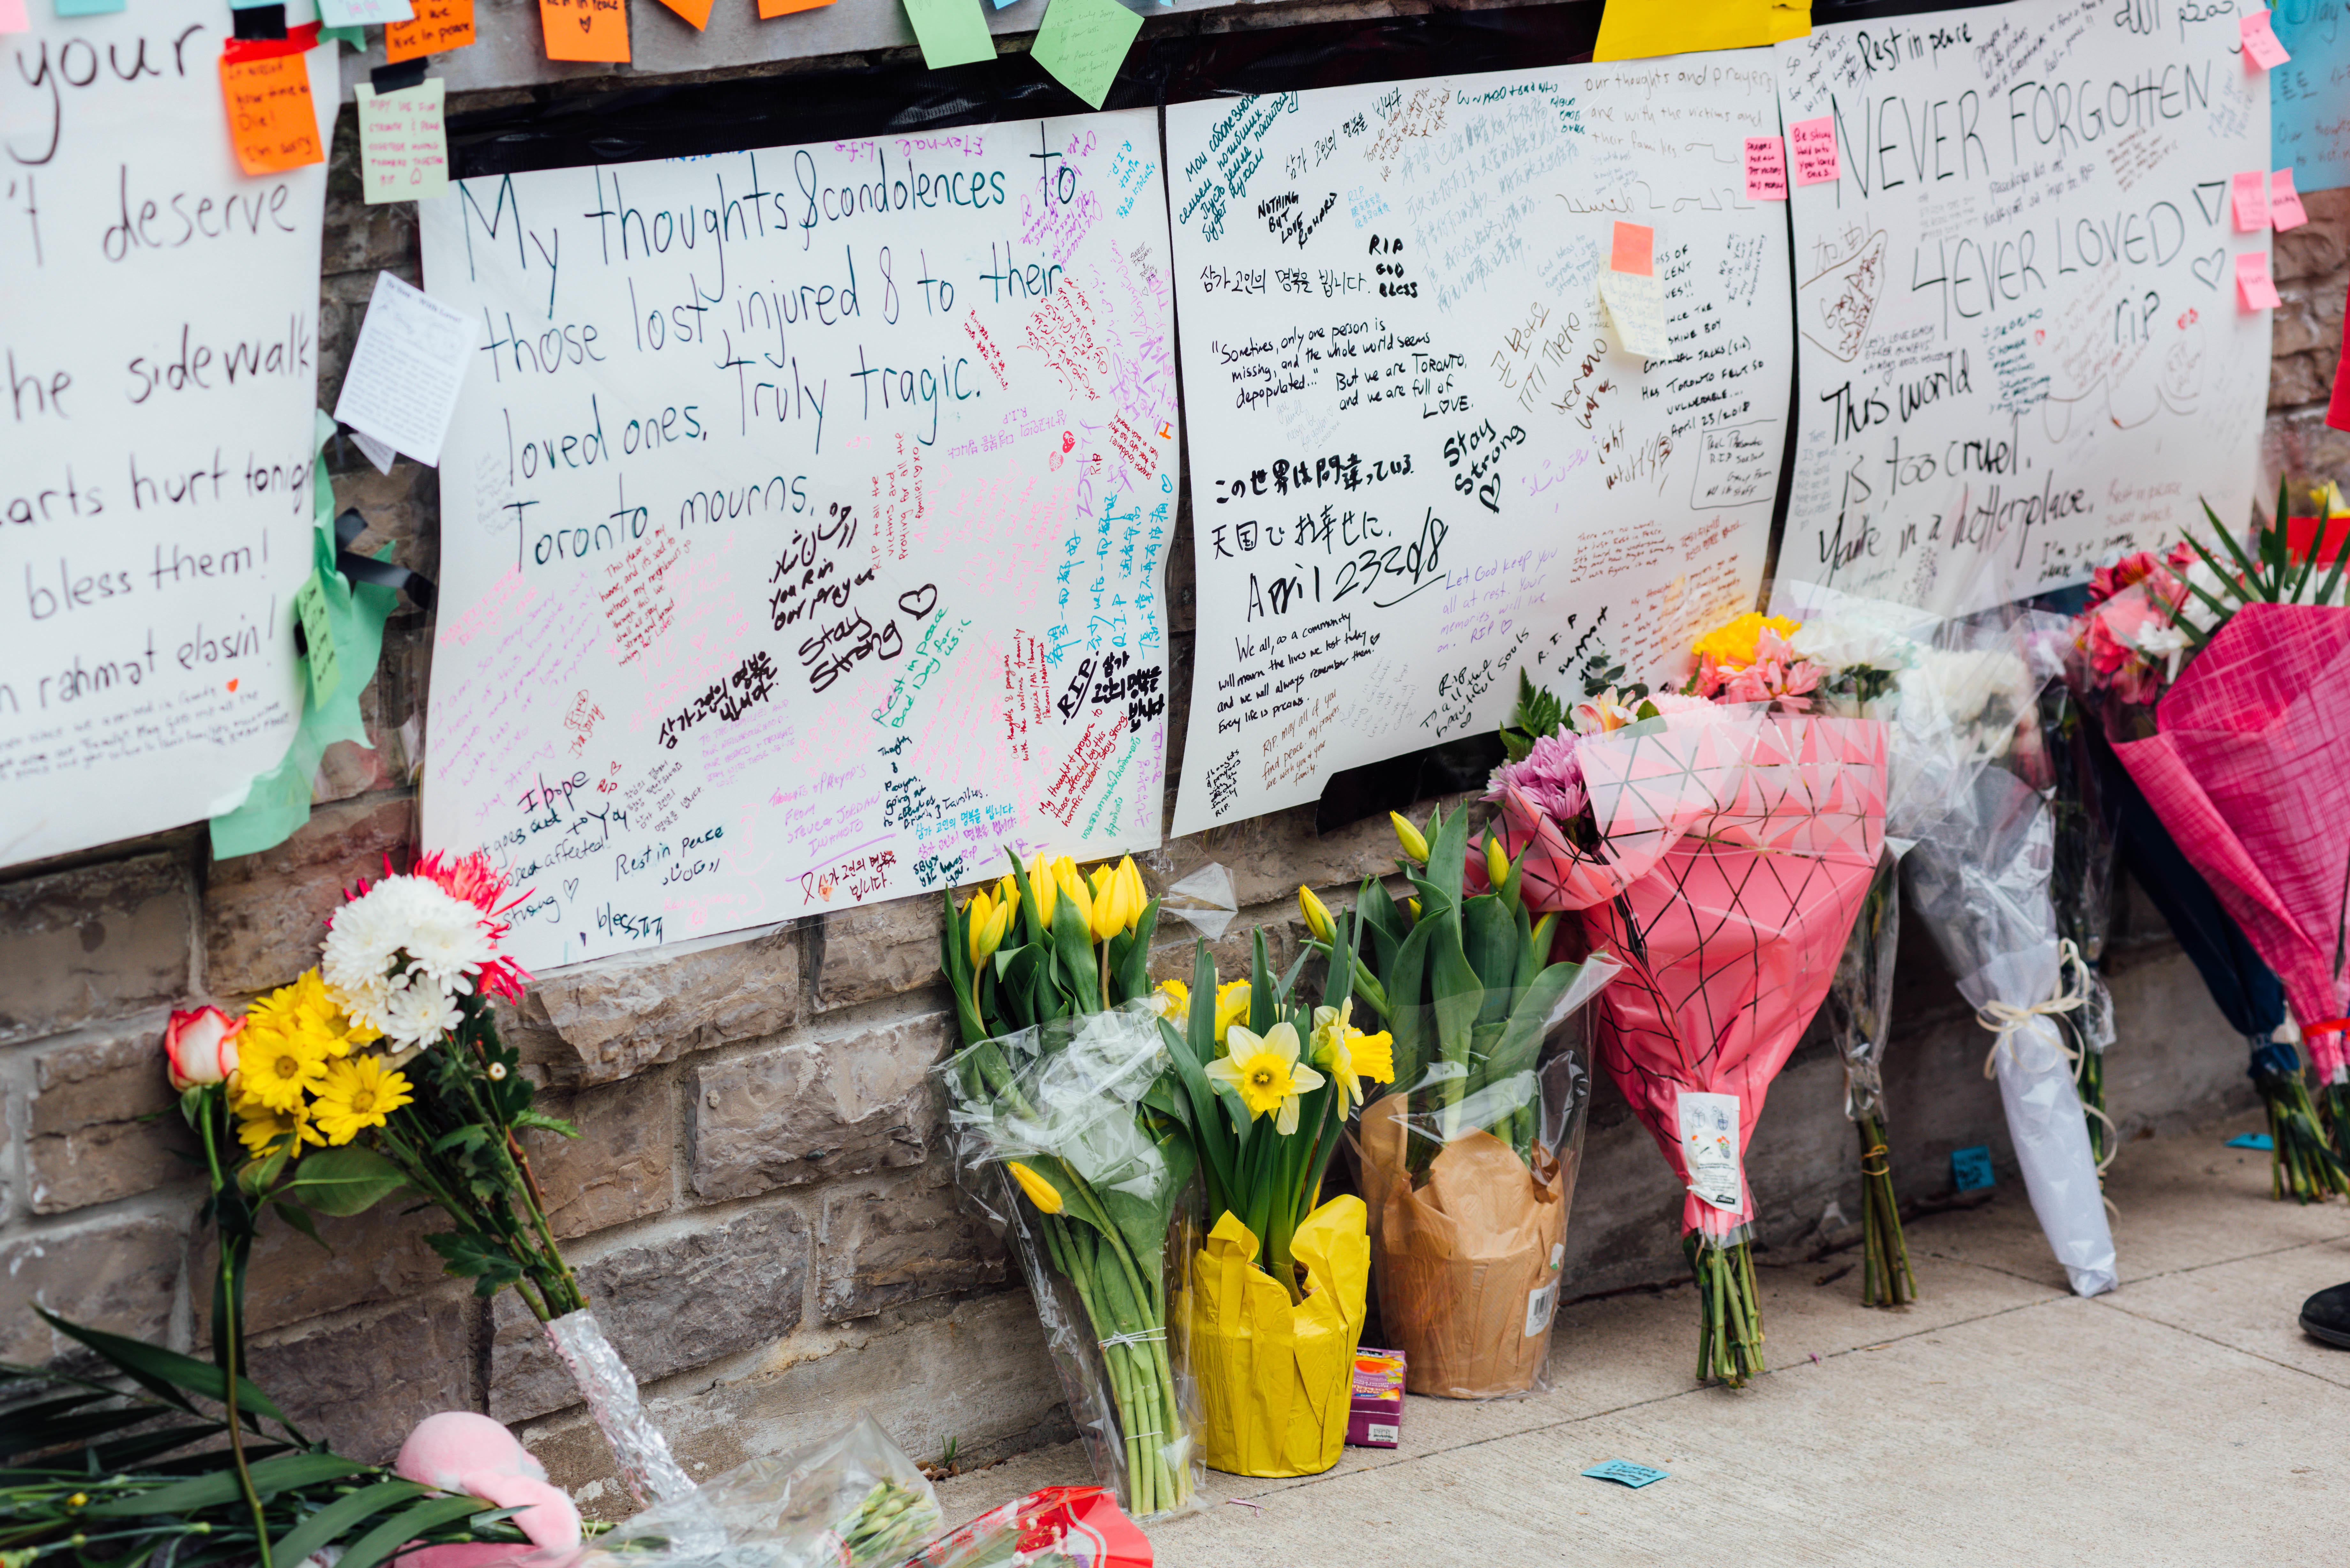 Flowers and messages are placed at a memorial for victims of the mass killing on April 24, 2018 in Toronto, Canada.